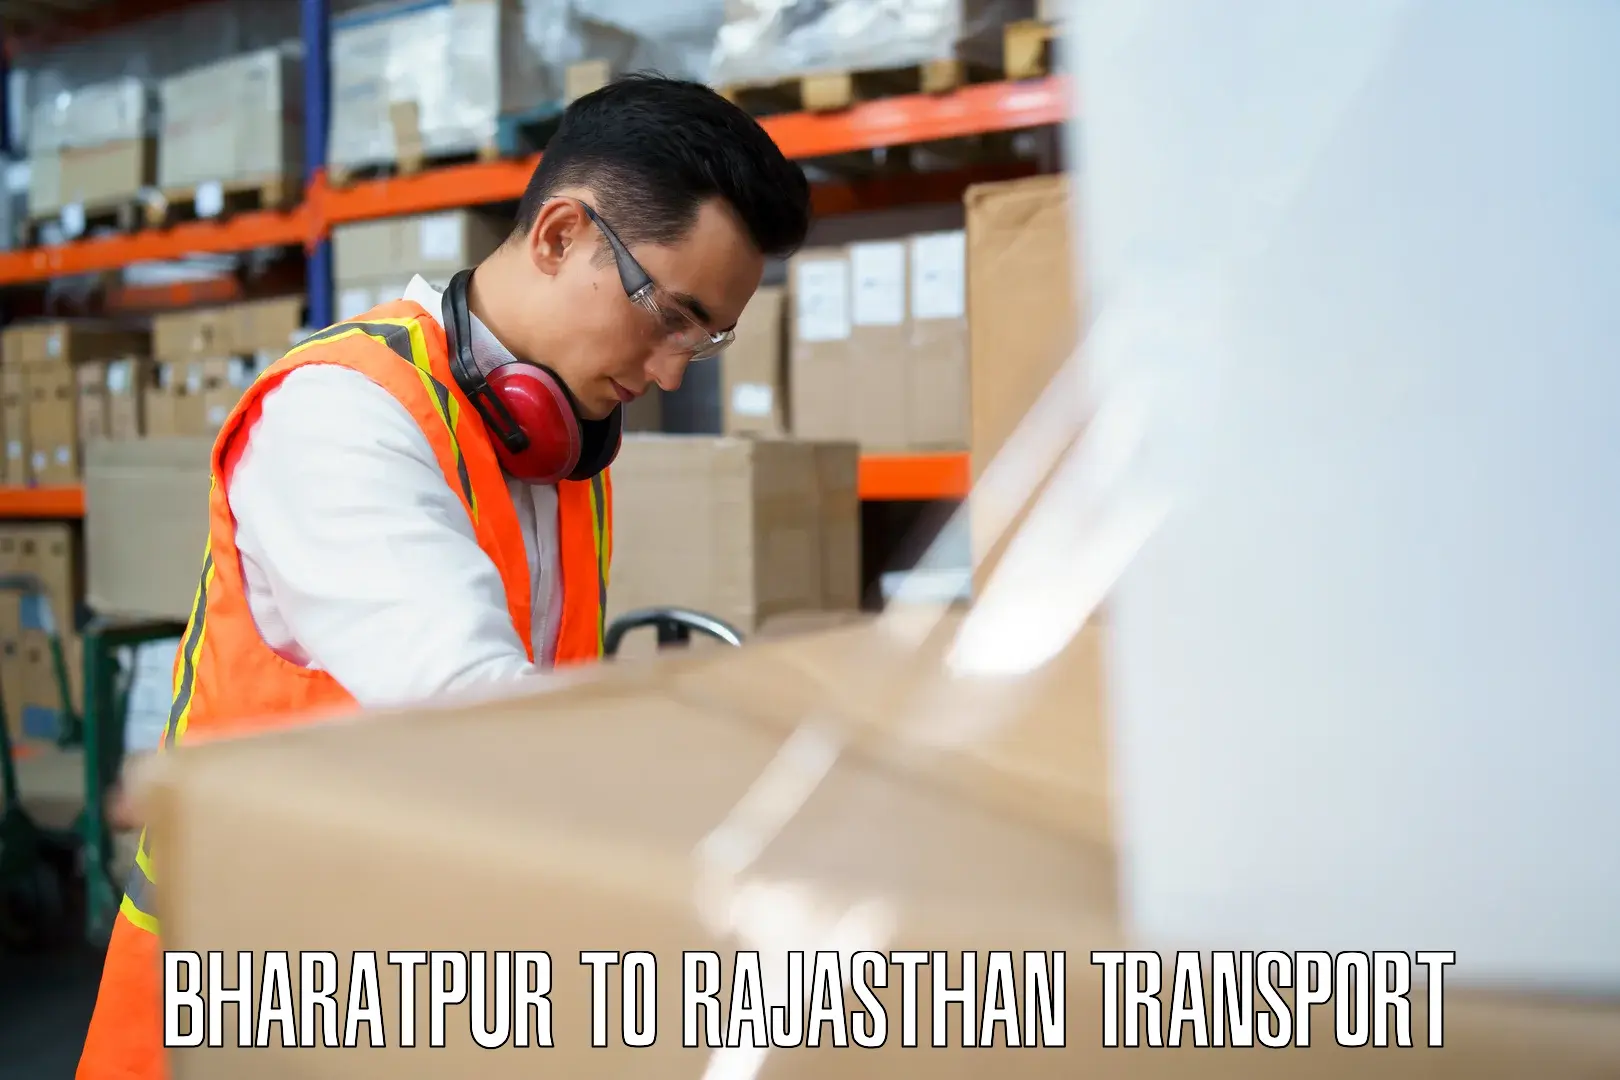 Daily parcel service transport in Bharatpur to Jaipur